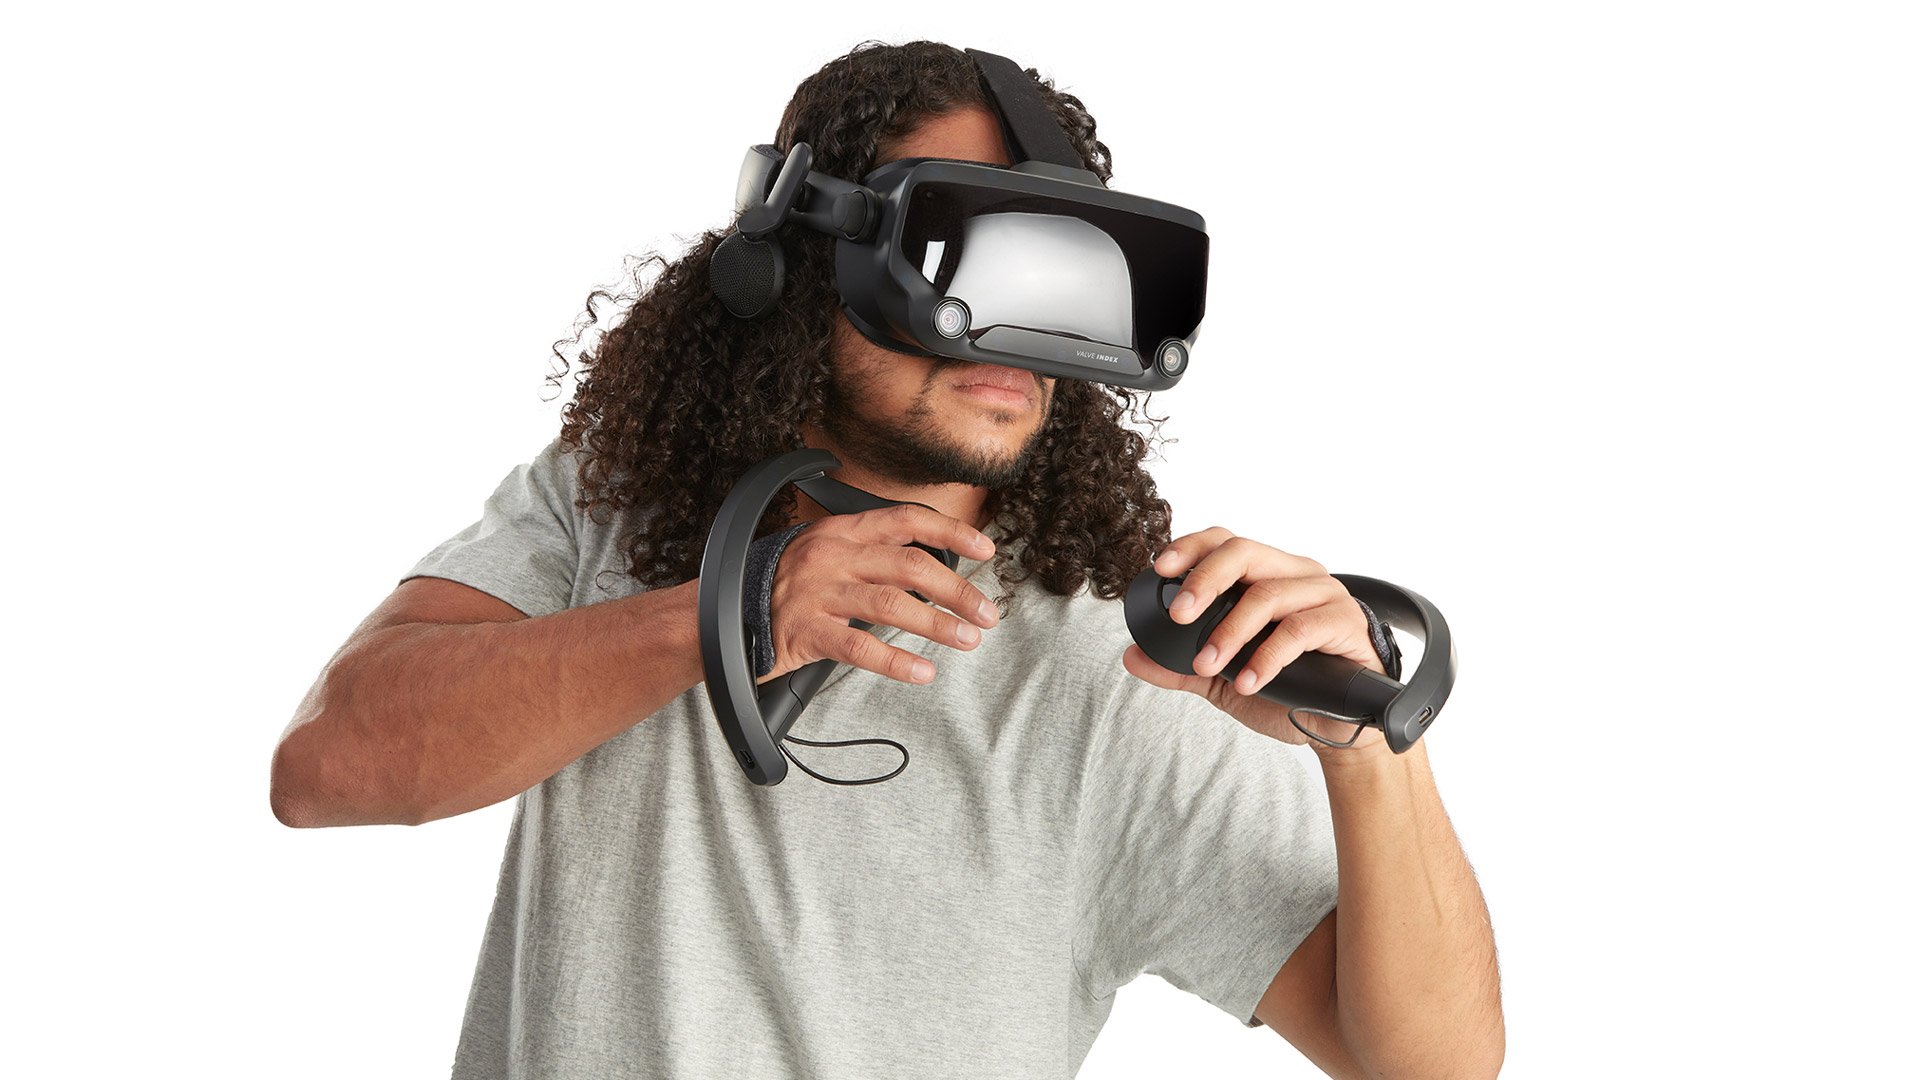 What are the Index virtual reality glasses from Valve?